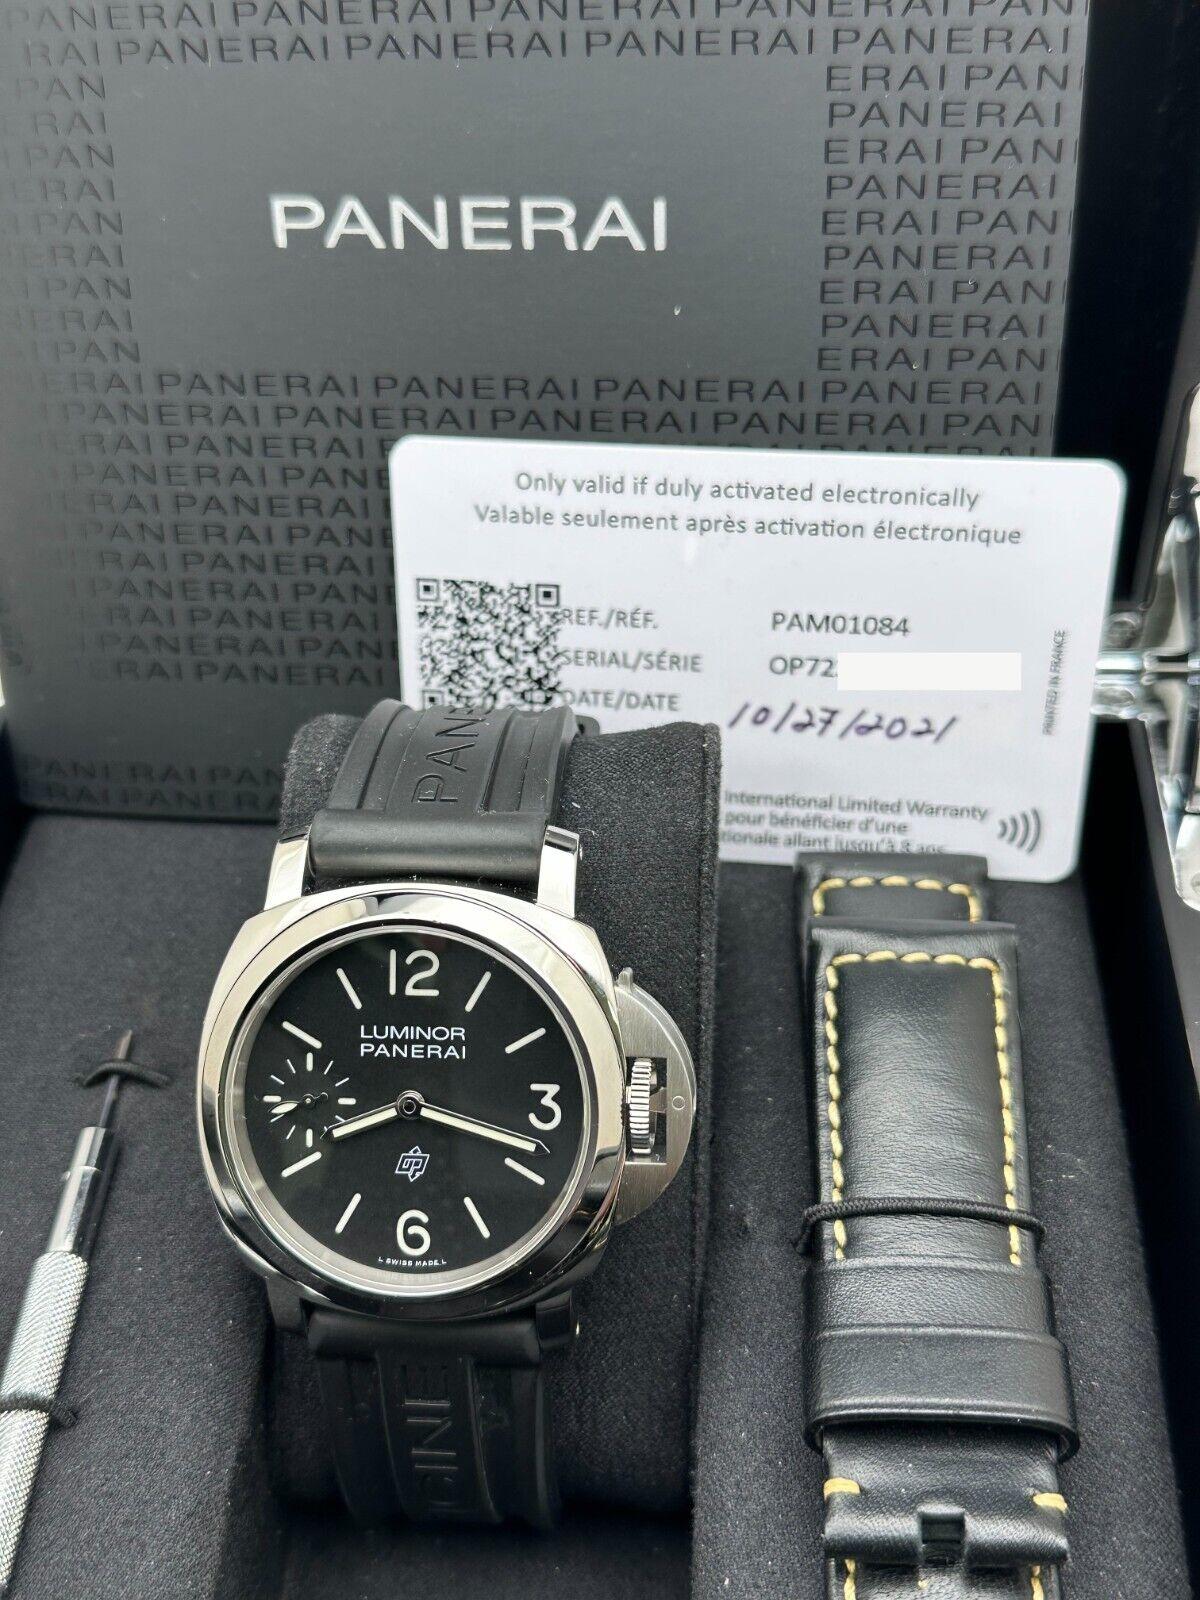 Style Number: PAM01084 PAM1084 

Year: 2021

Model: Luminor Logo

Case Material: Stainless Steel 

Band: Black Rubber Strap 

Bezel:  Stainless Steel 

Dial: Black 

Face: Sapphire Crystal  

Case Size: 44mm 

Includes: 

-Panerai Box &